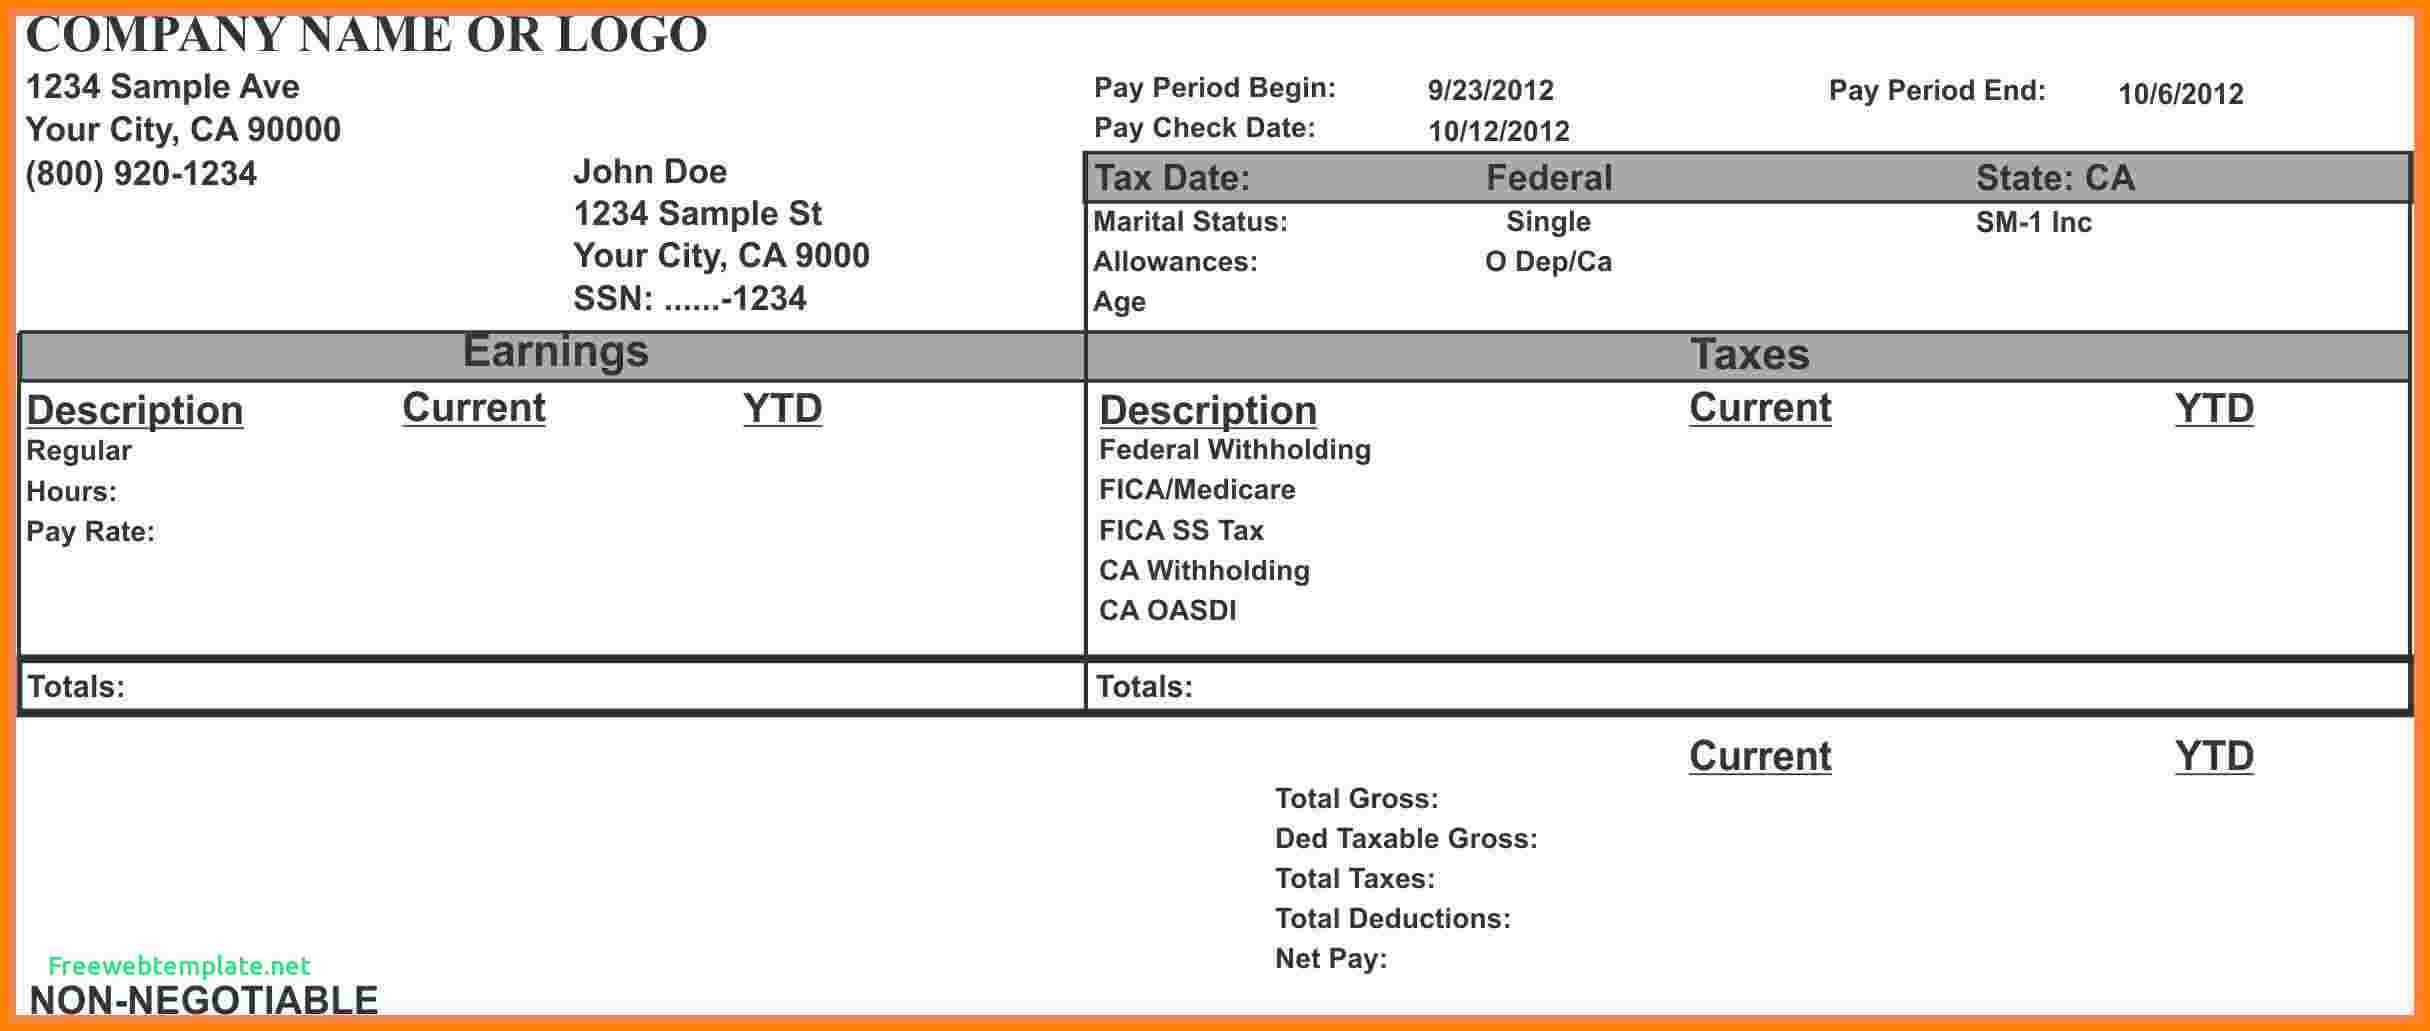 010 Template Ideas Paycheck Stub For Excel Blank Pay Word Regarding Blank Check Templates For Microsoft Word